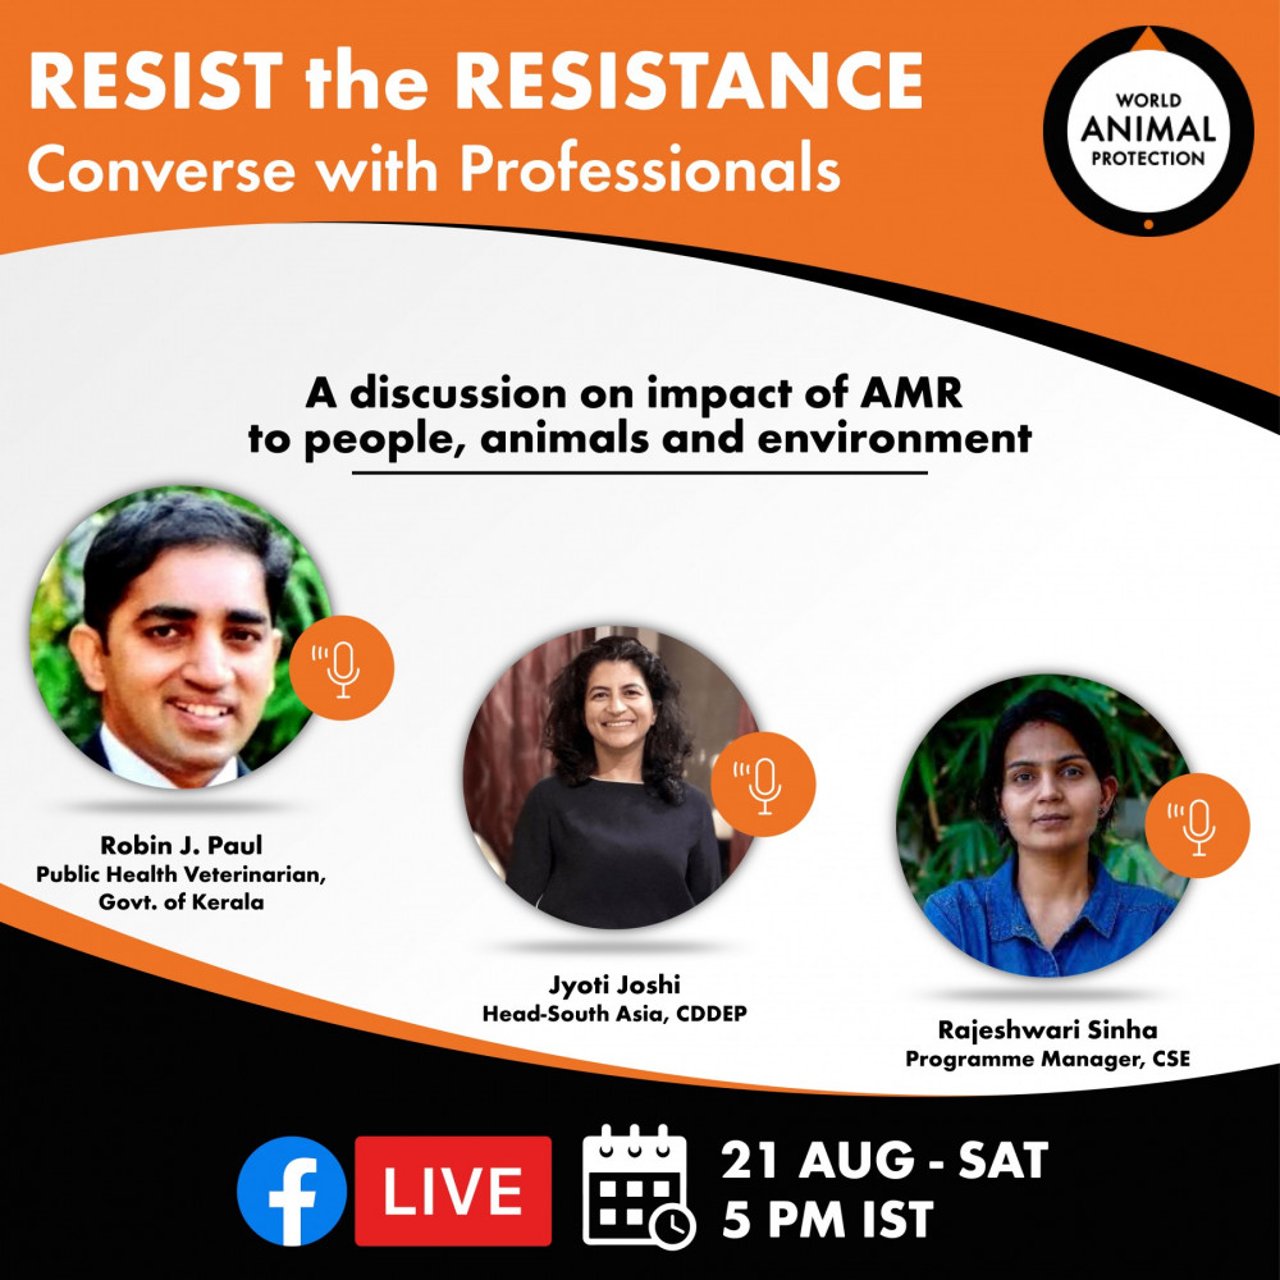 Resist the resistance. A discussion on the impact of antimicrobial resistance (AMR)